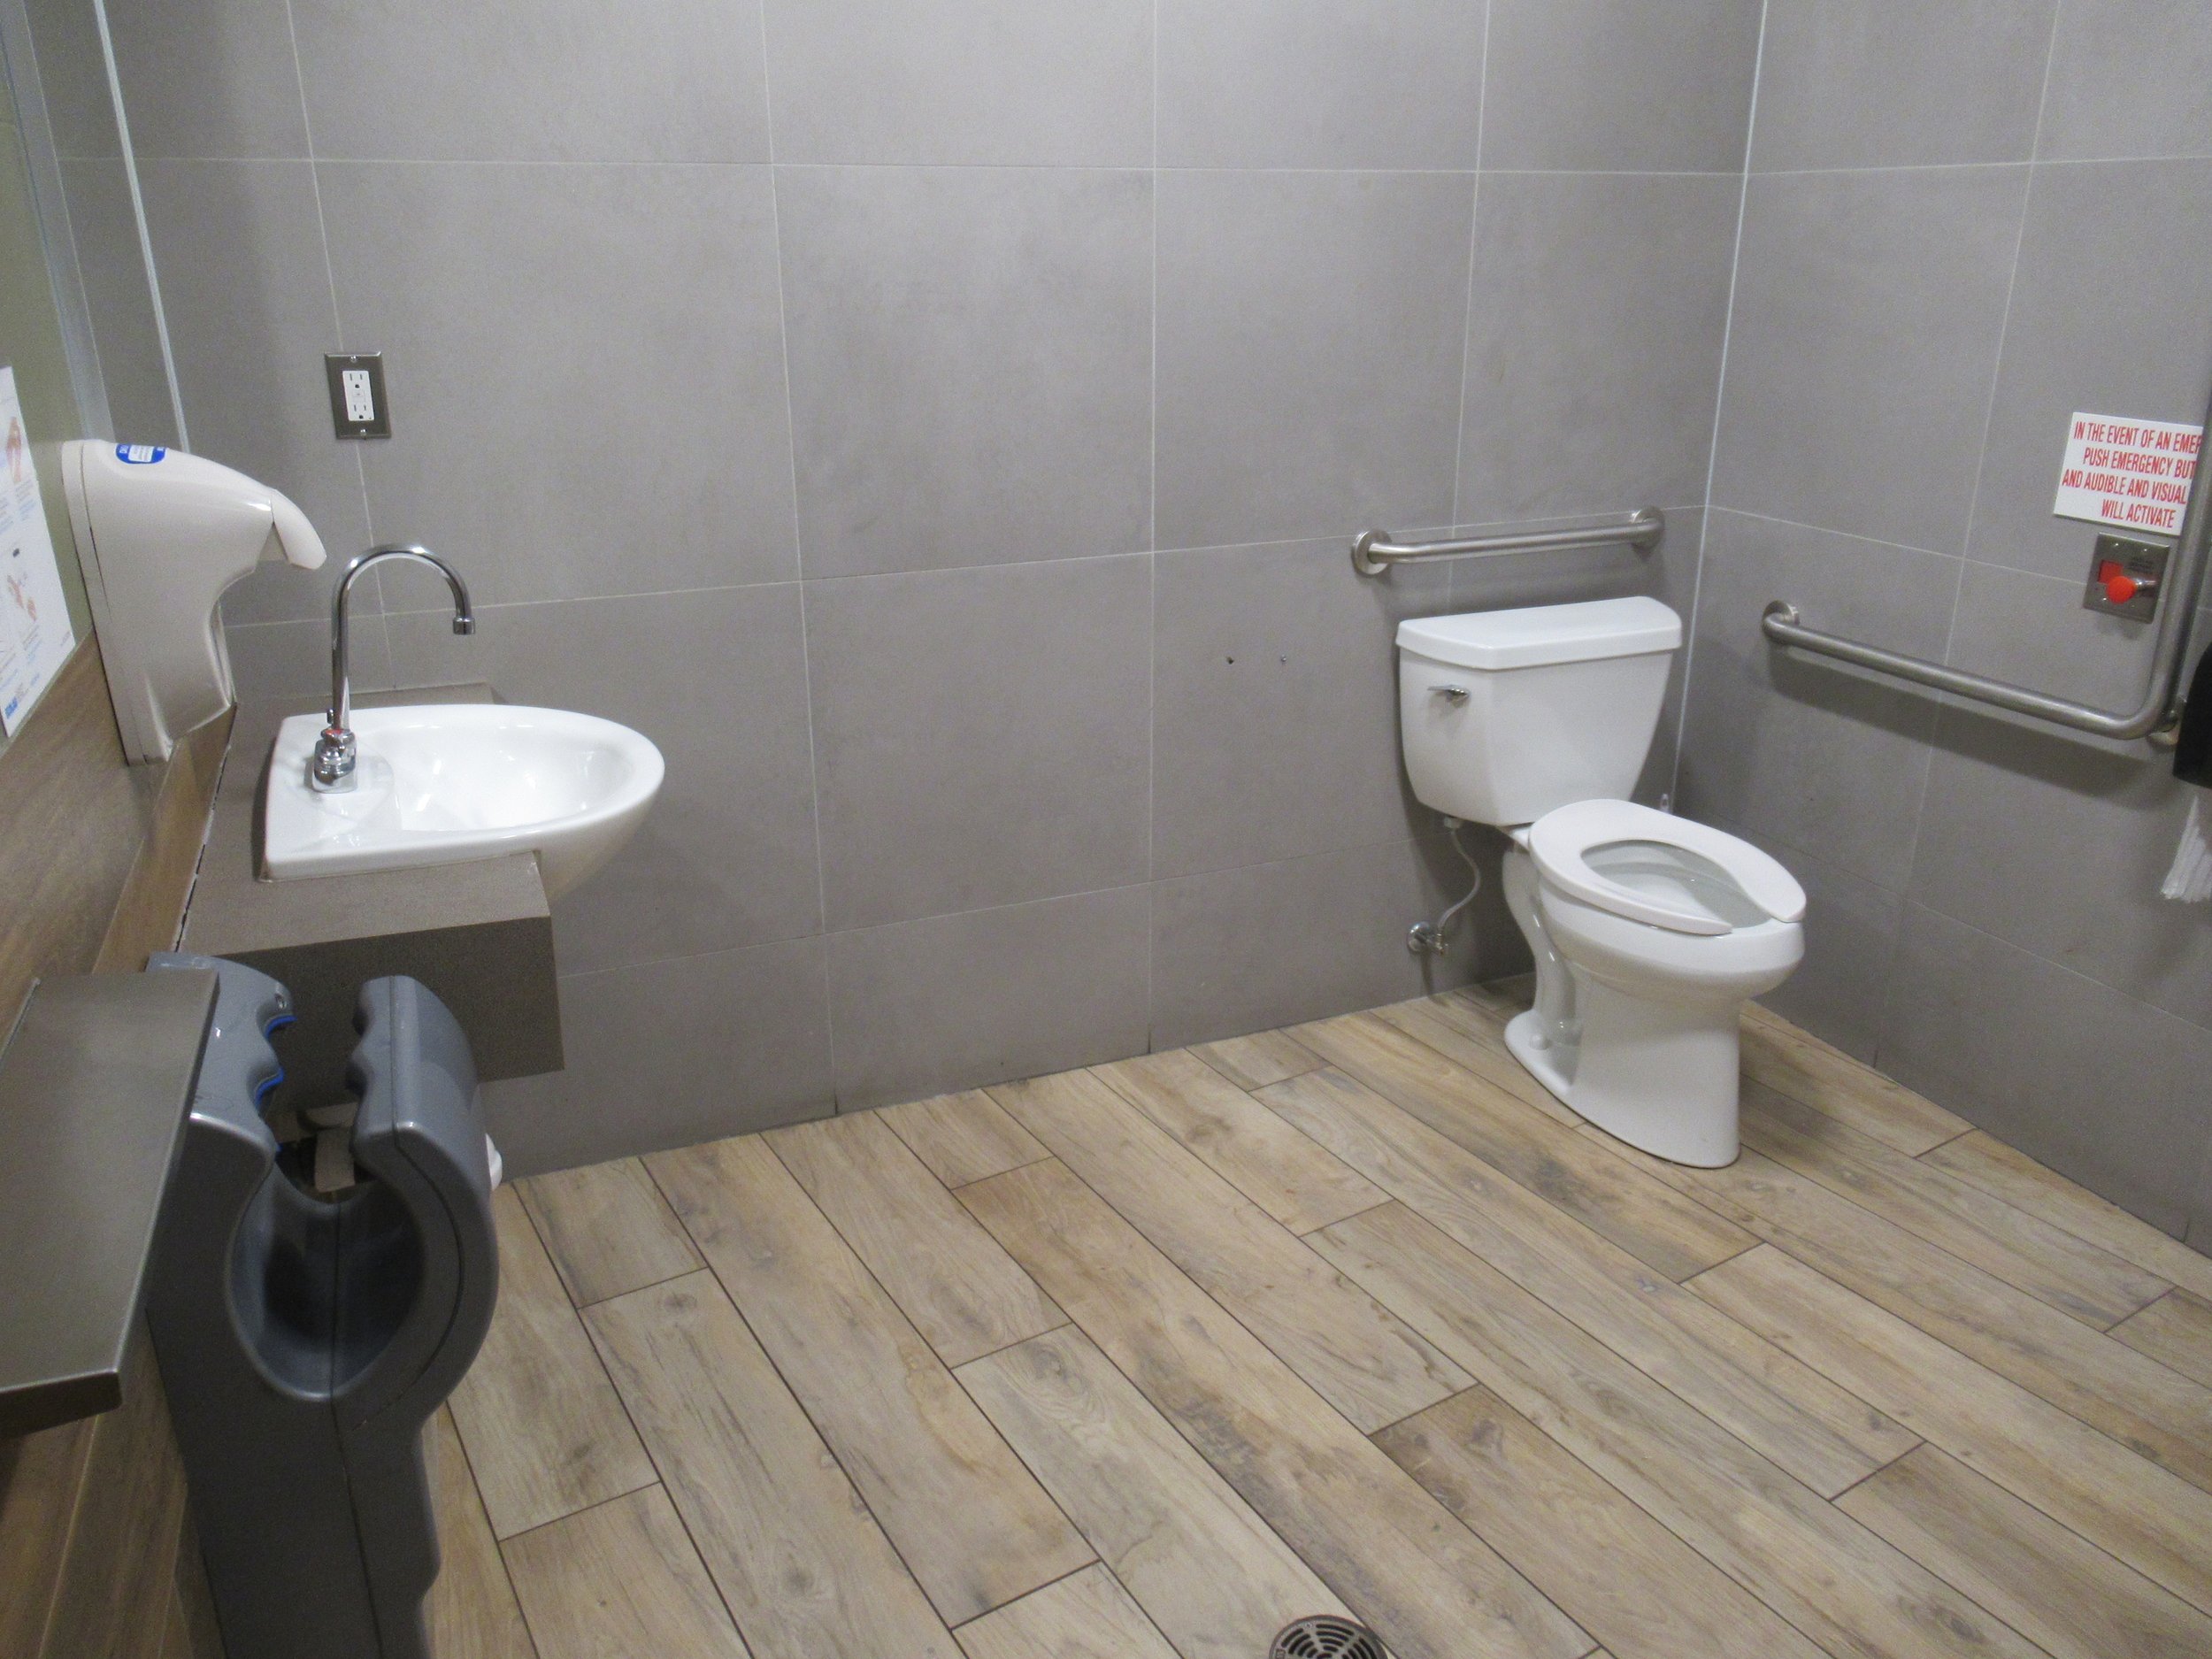 Large single stall washroom with automatic features